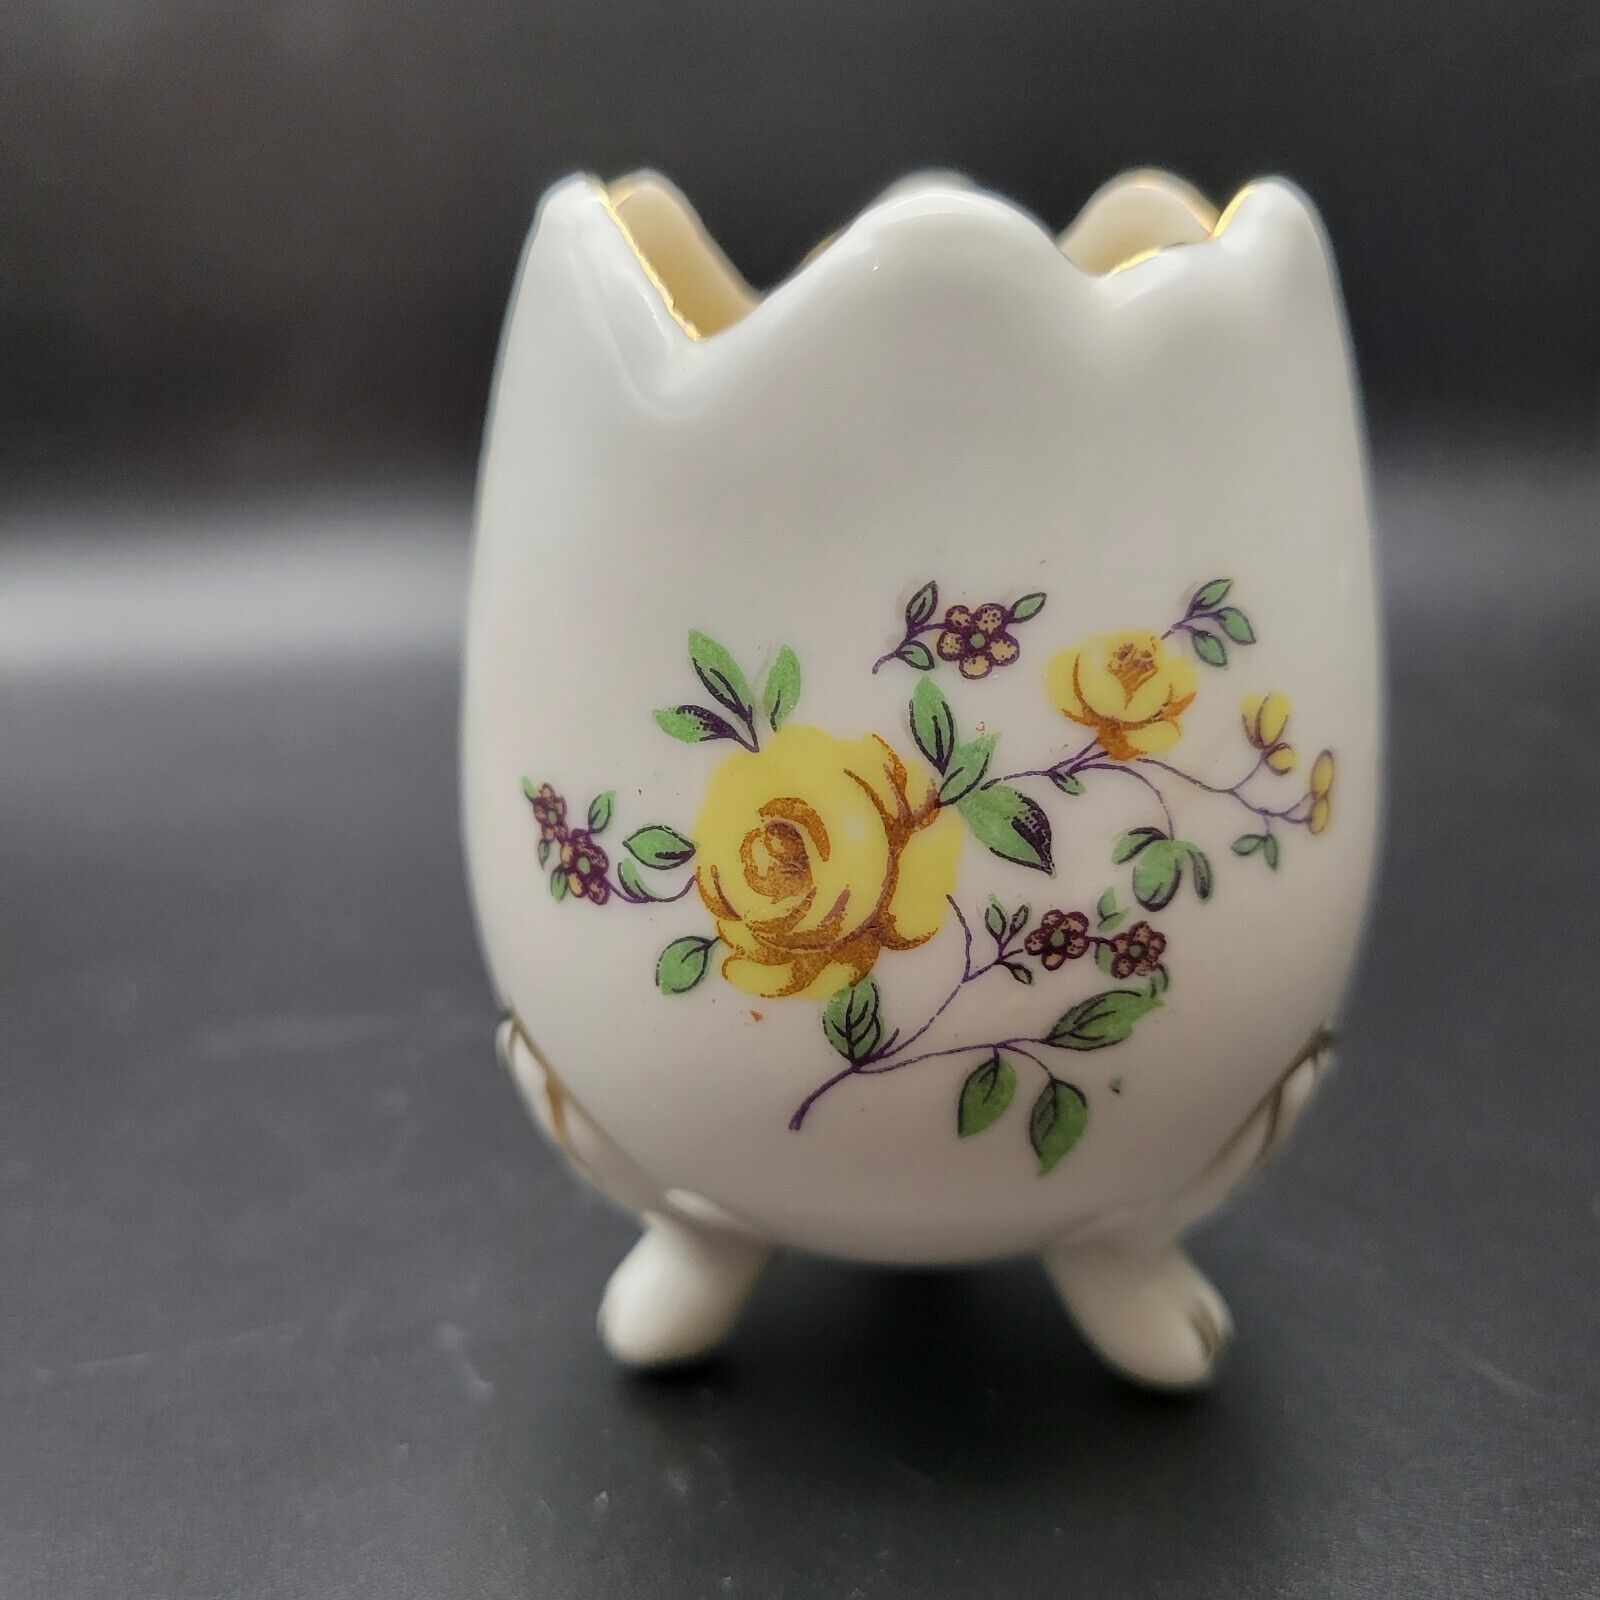 Vintage Porcelain Hand-Painted 3-Footed Cracked Egg Vase- Yellow Roses, w/candle